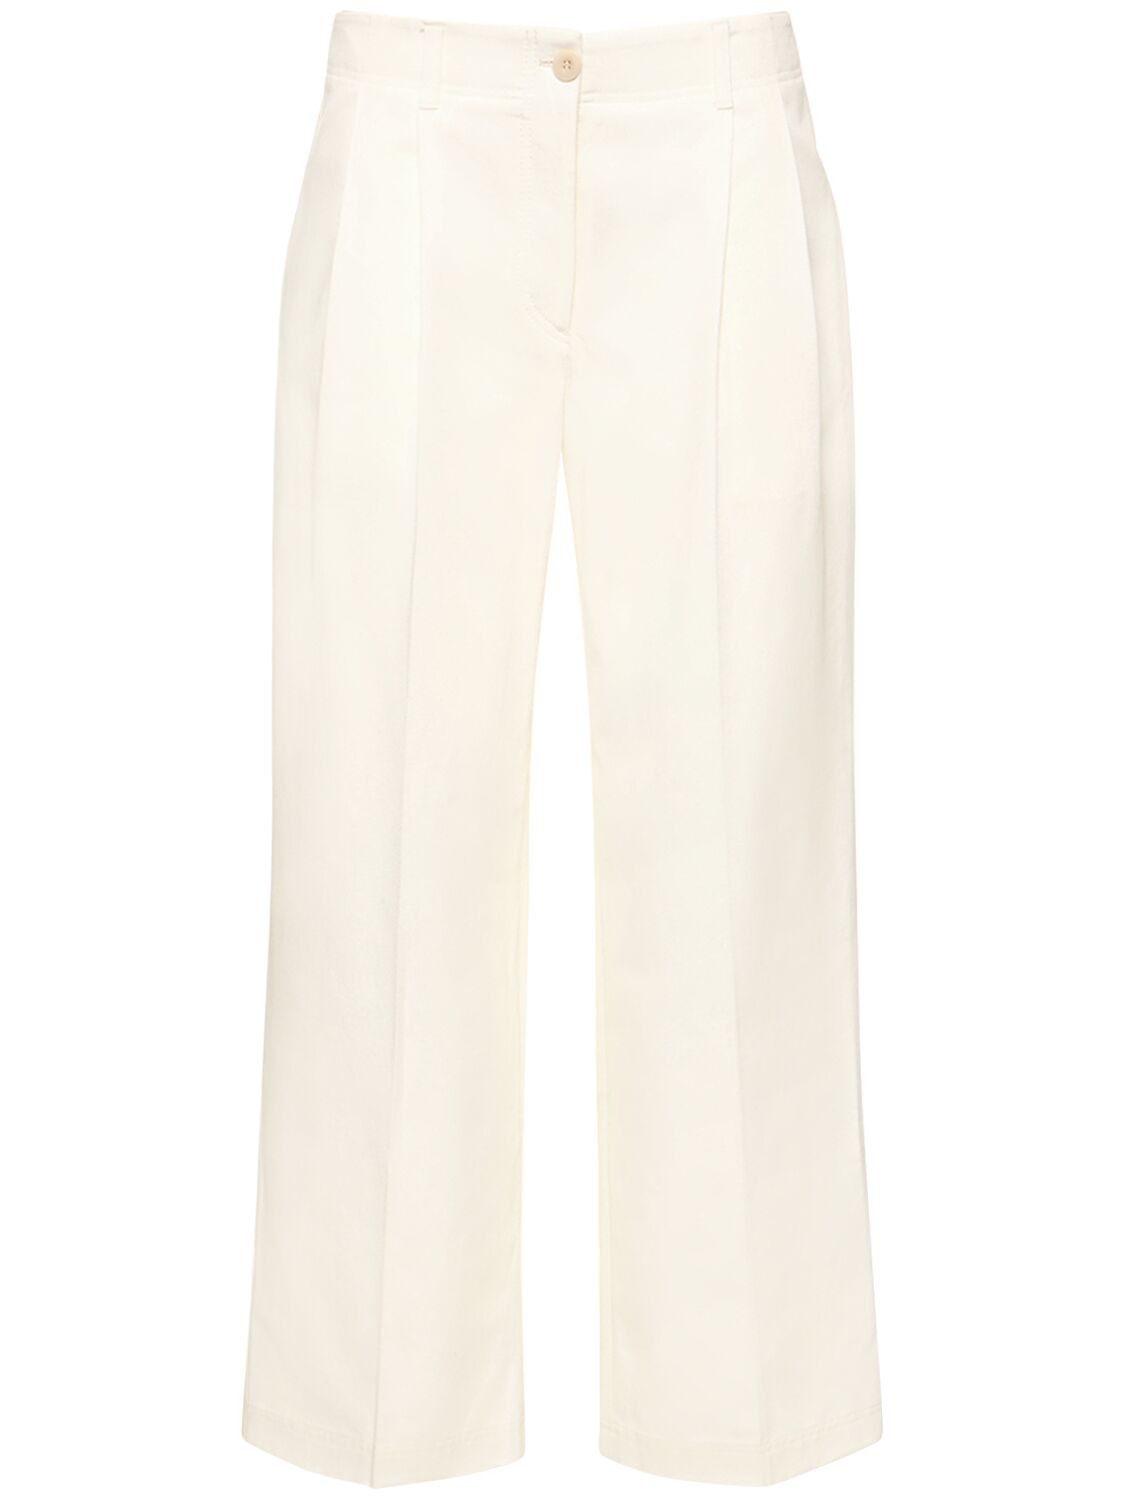 Totême Relaxed Twill Cotton Pants In Neutral